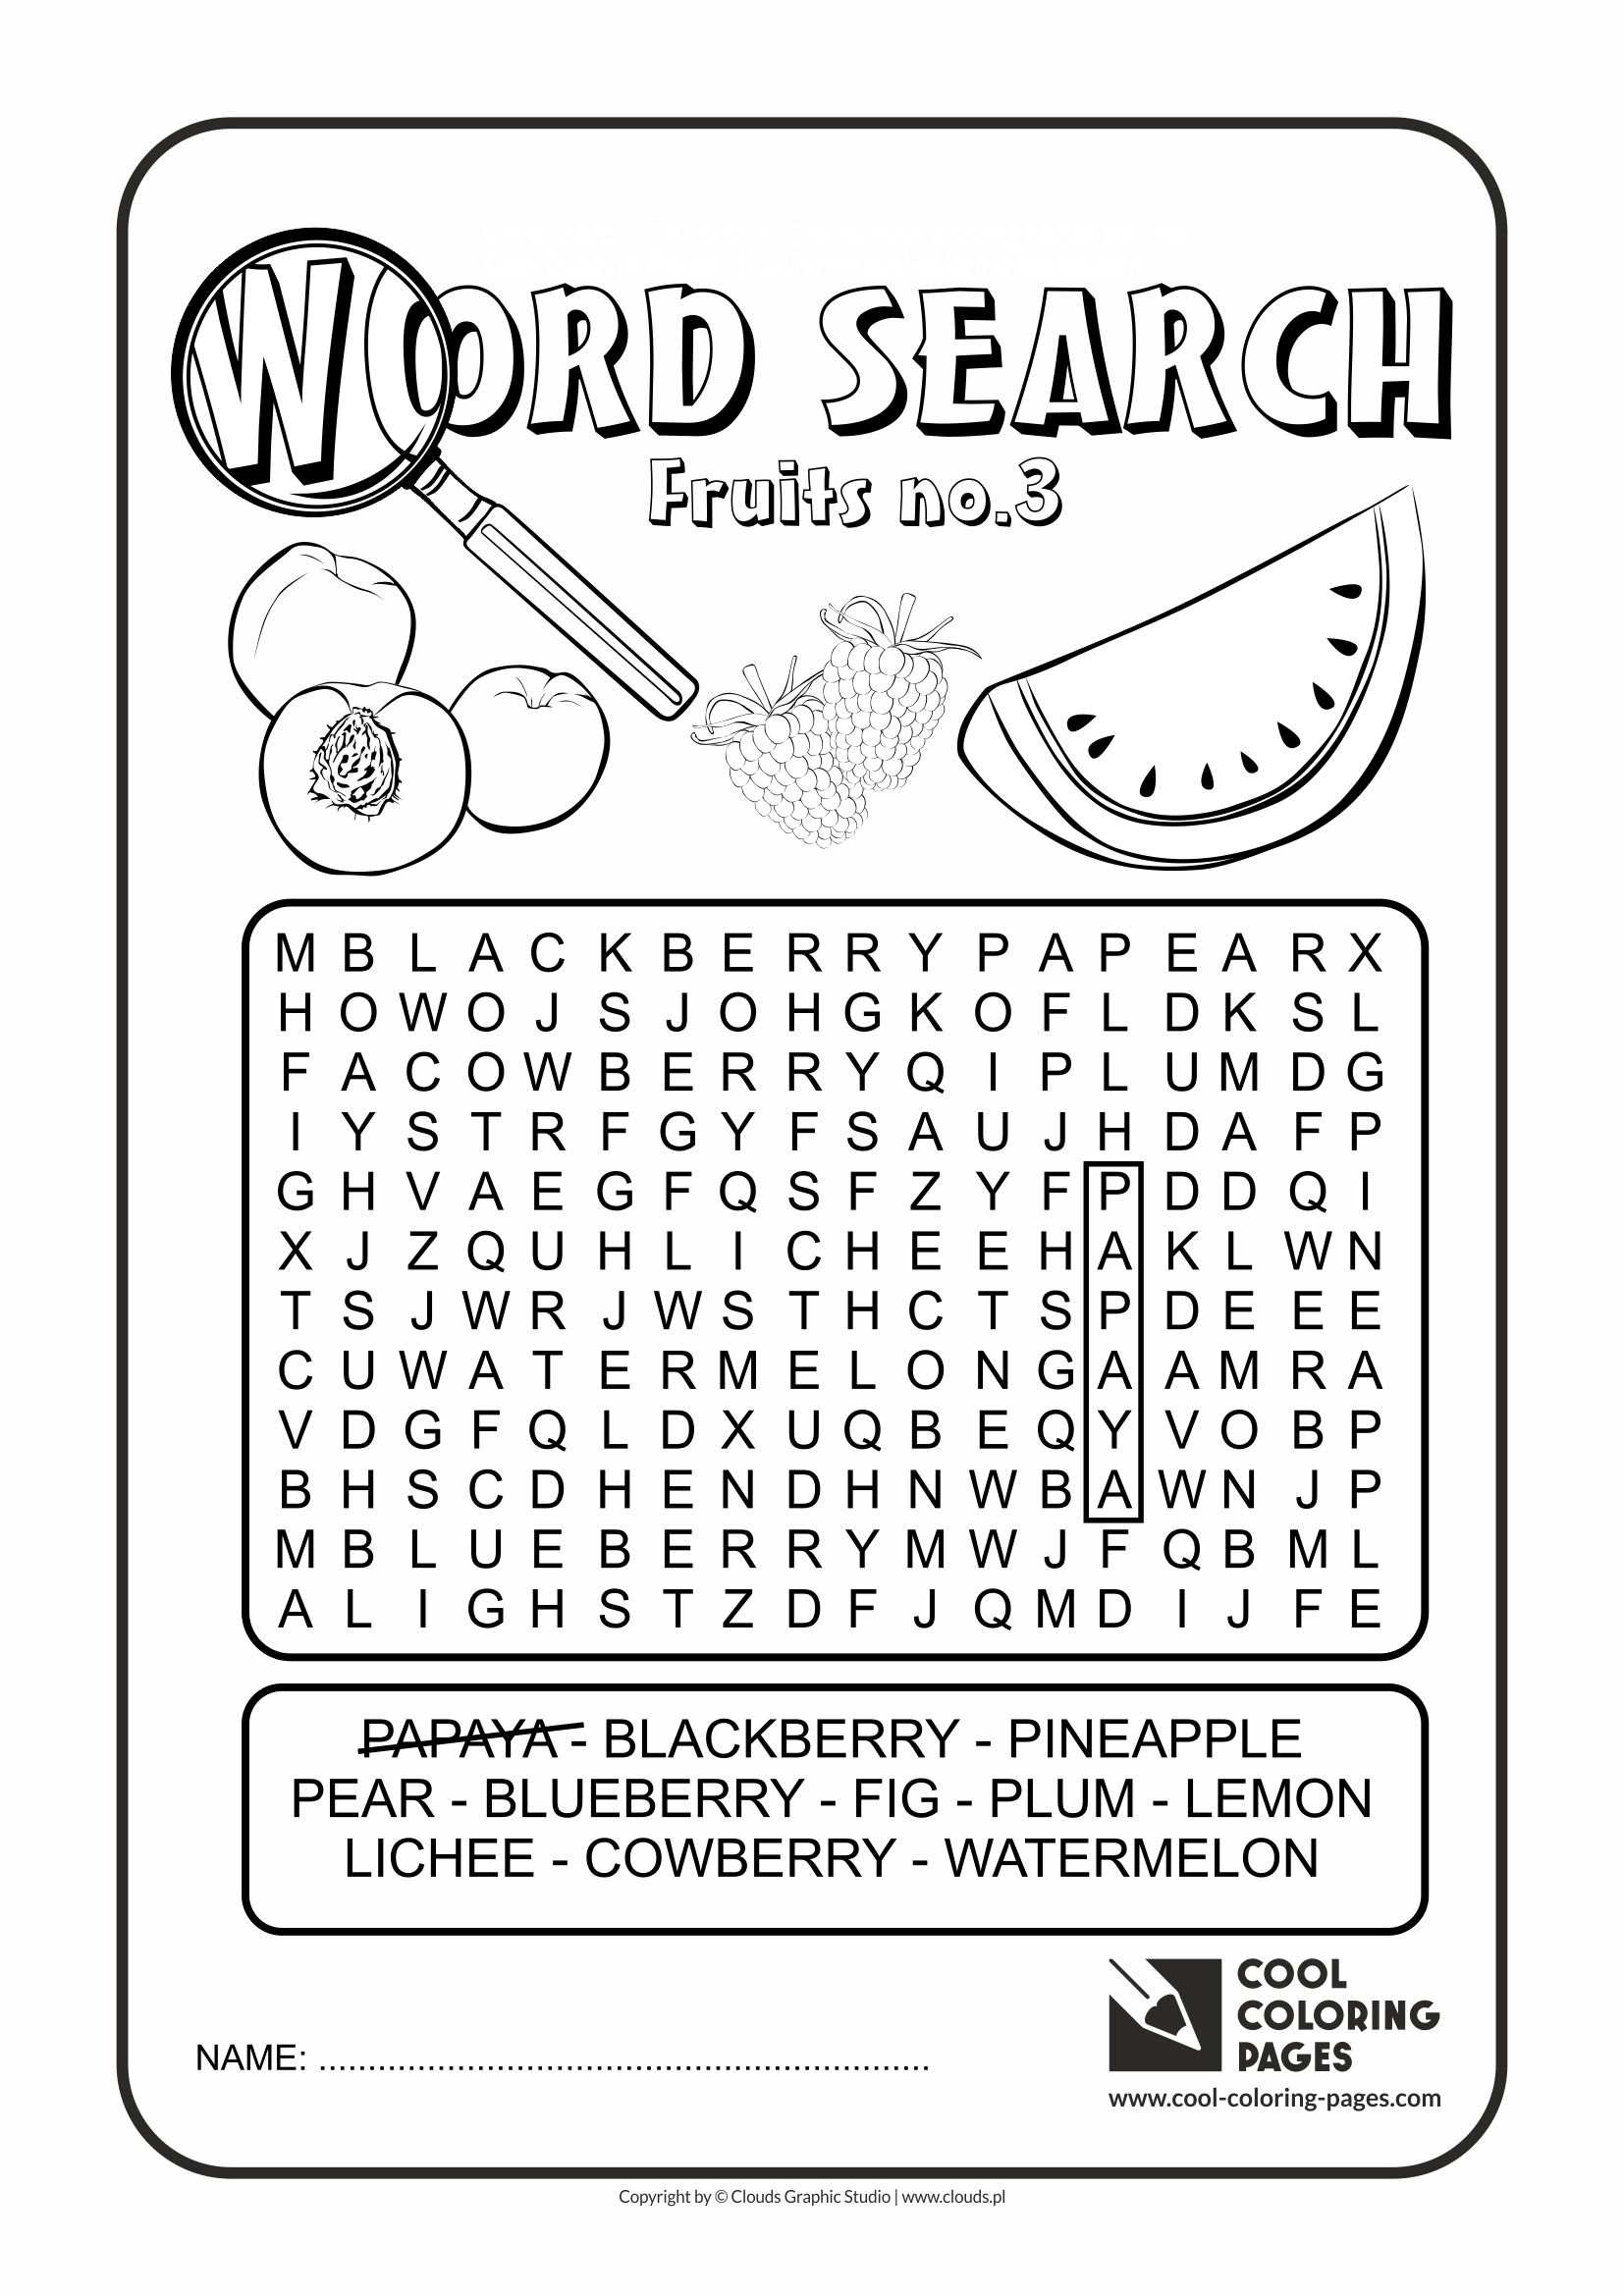 Cool Coloring Pages Word Search Cool Coloring Pages Free 